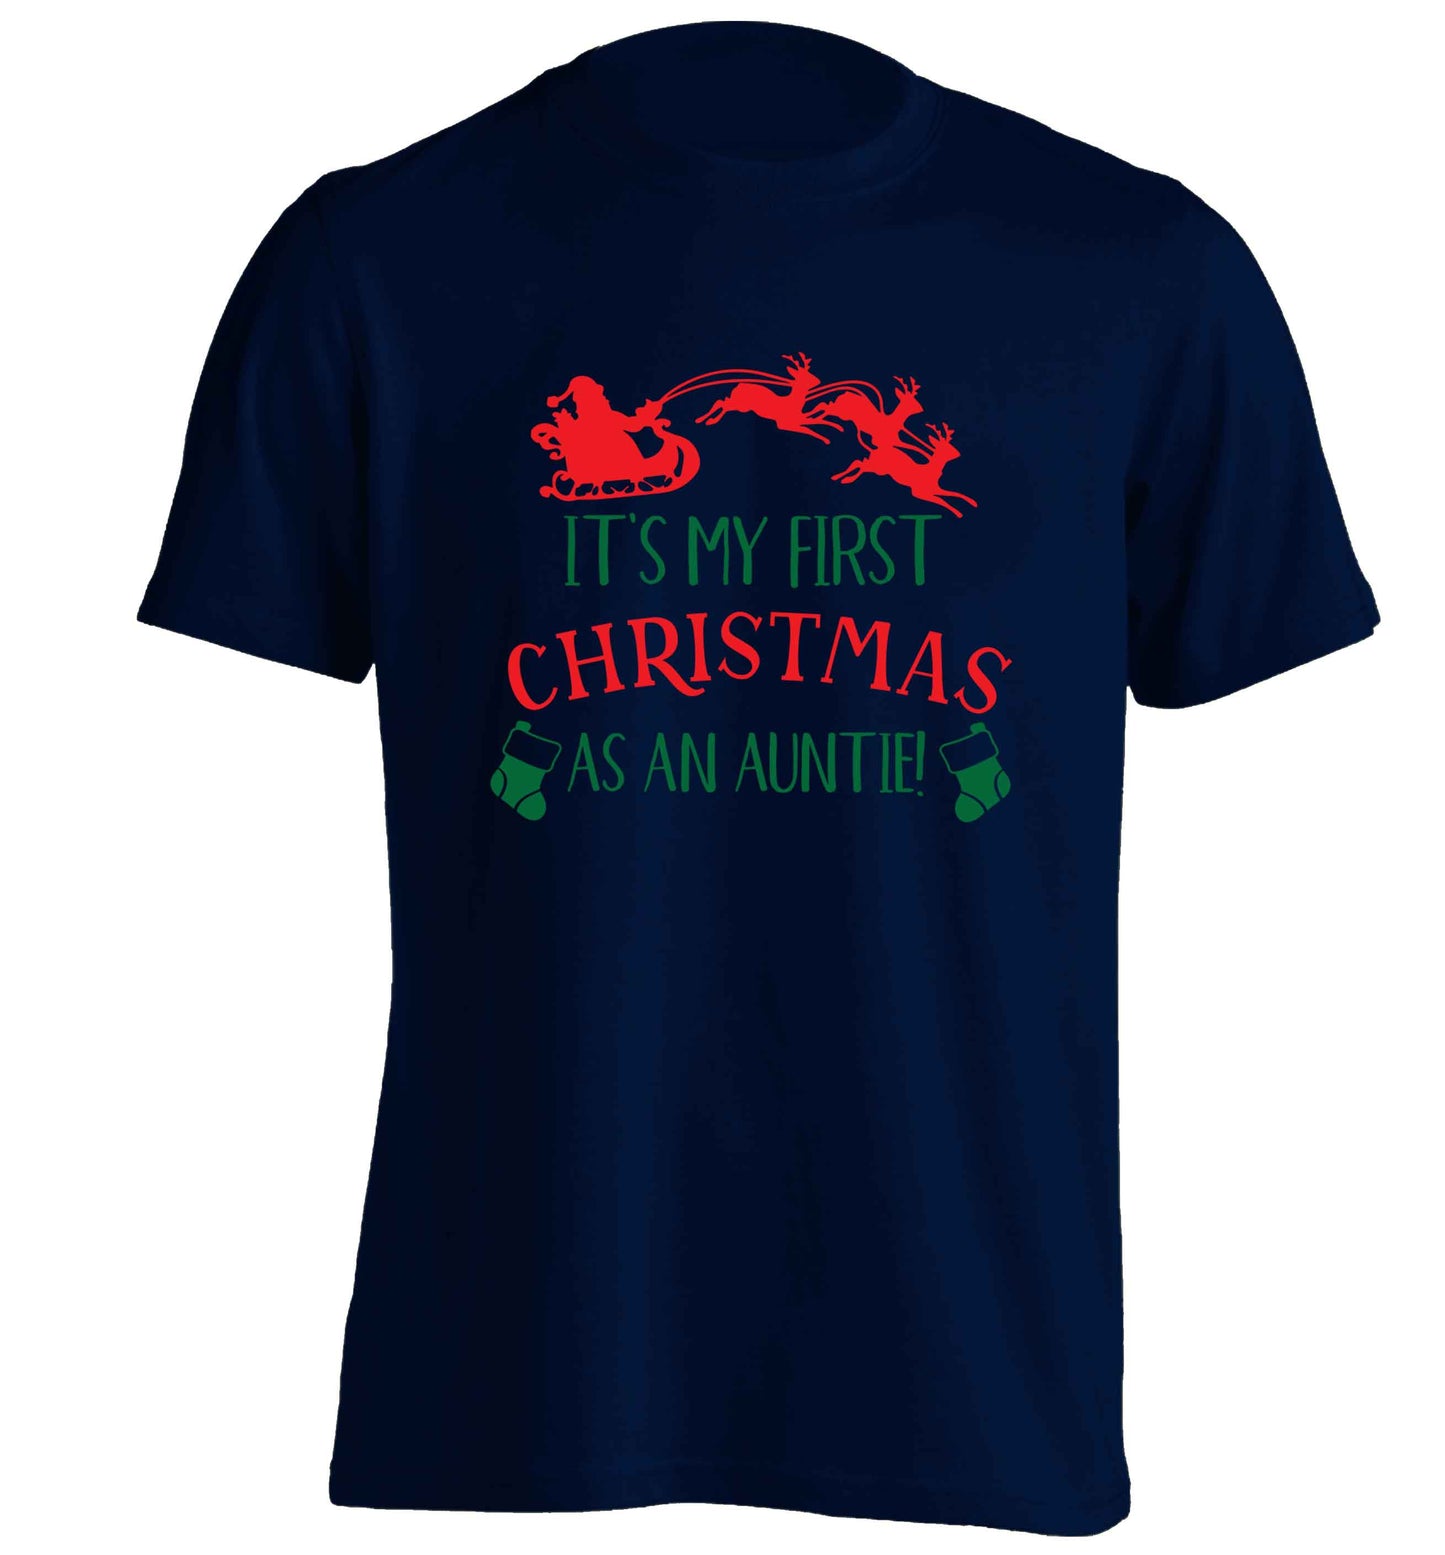 It's my first Christmas as an auntie! adults unisex navy Tshirt 2XL